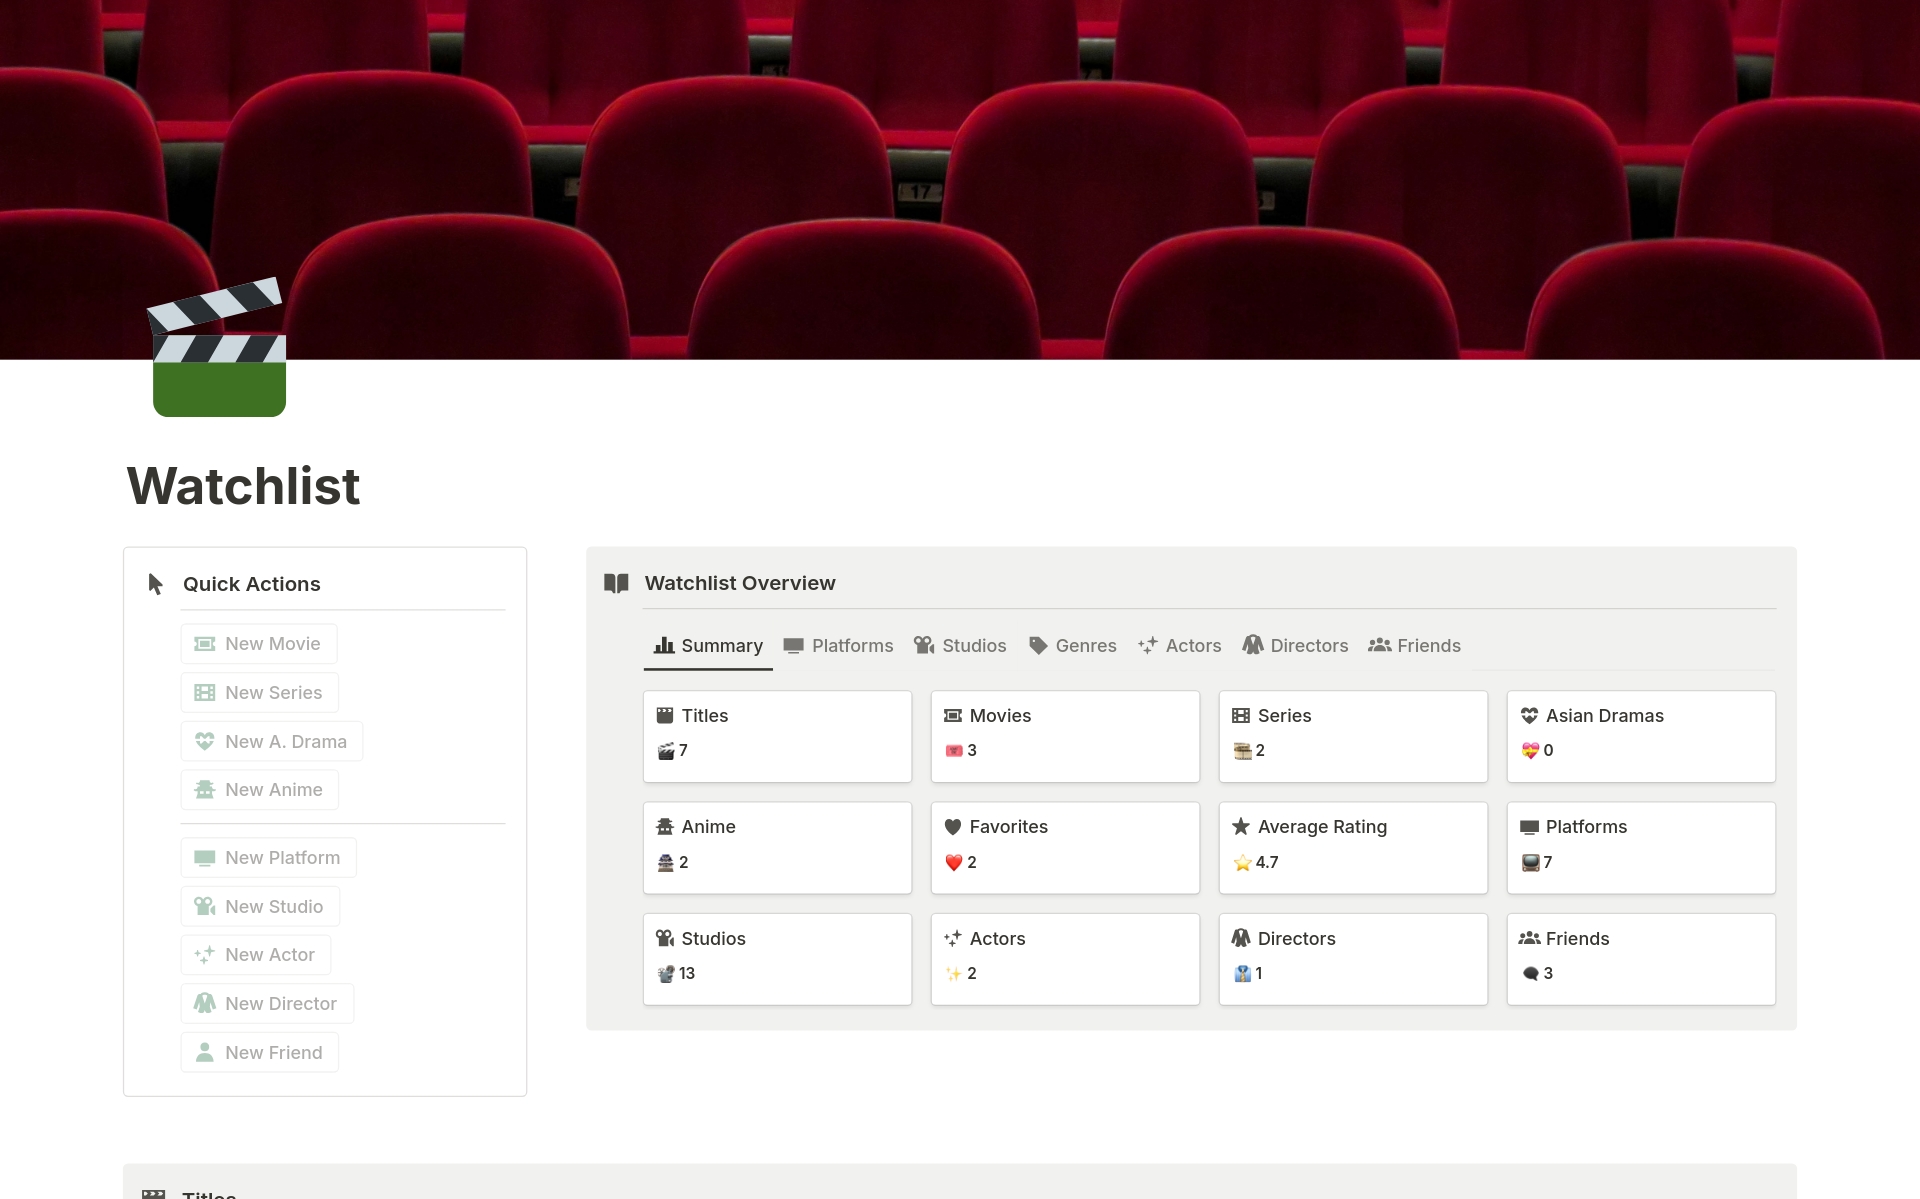 Manage your movies, series, Asian dramas, and anime in one place. Link your favorite actors and directors, manage your friends' recommendations, and much more. Check it out now! ⭐